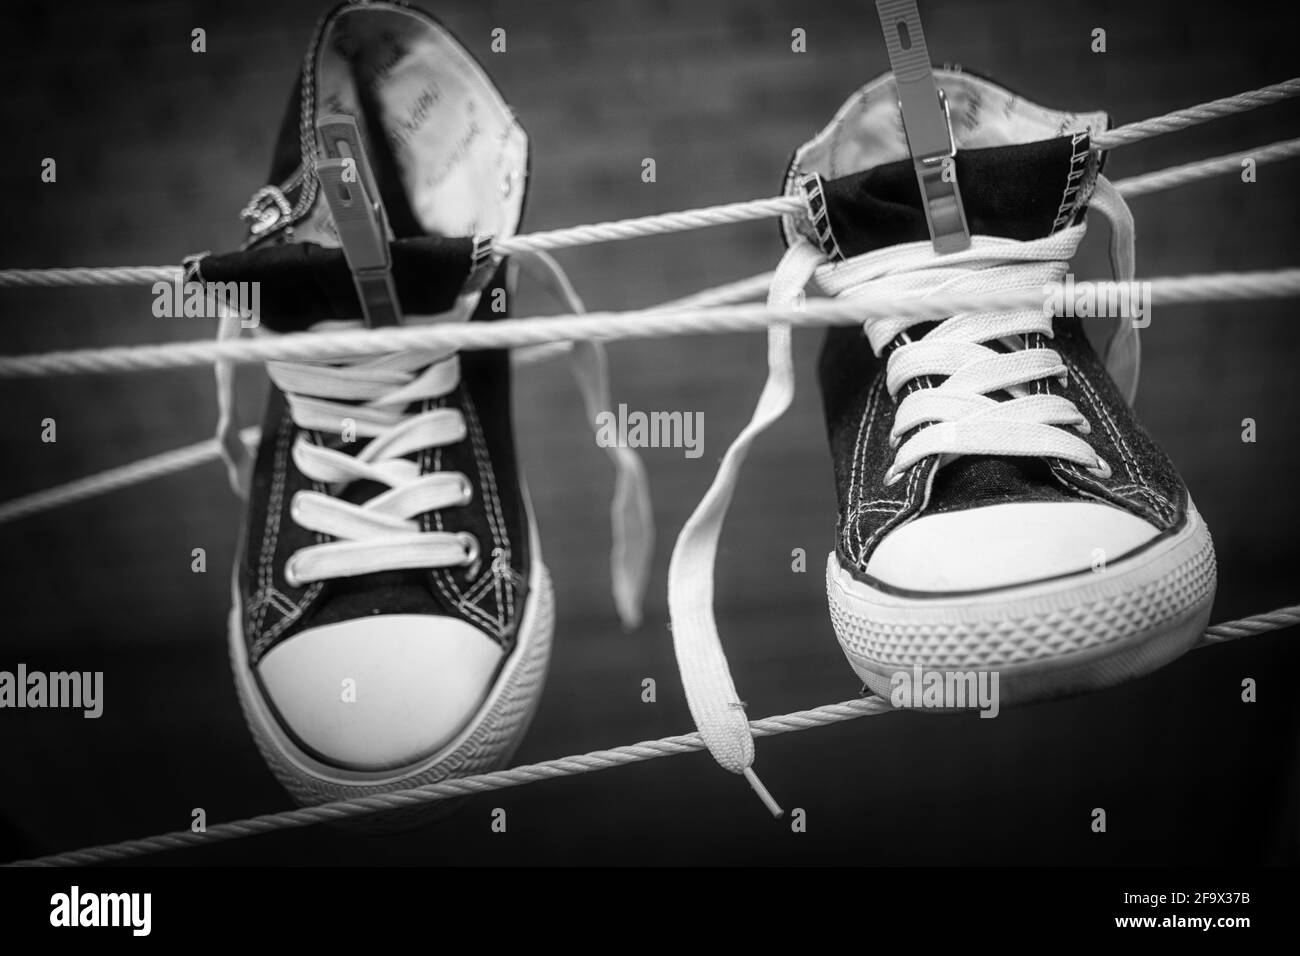 Cleaning shoes Black and White Stock Photos & Images - Alamy